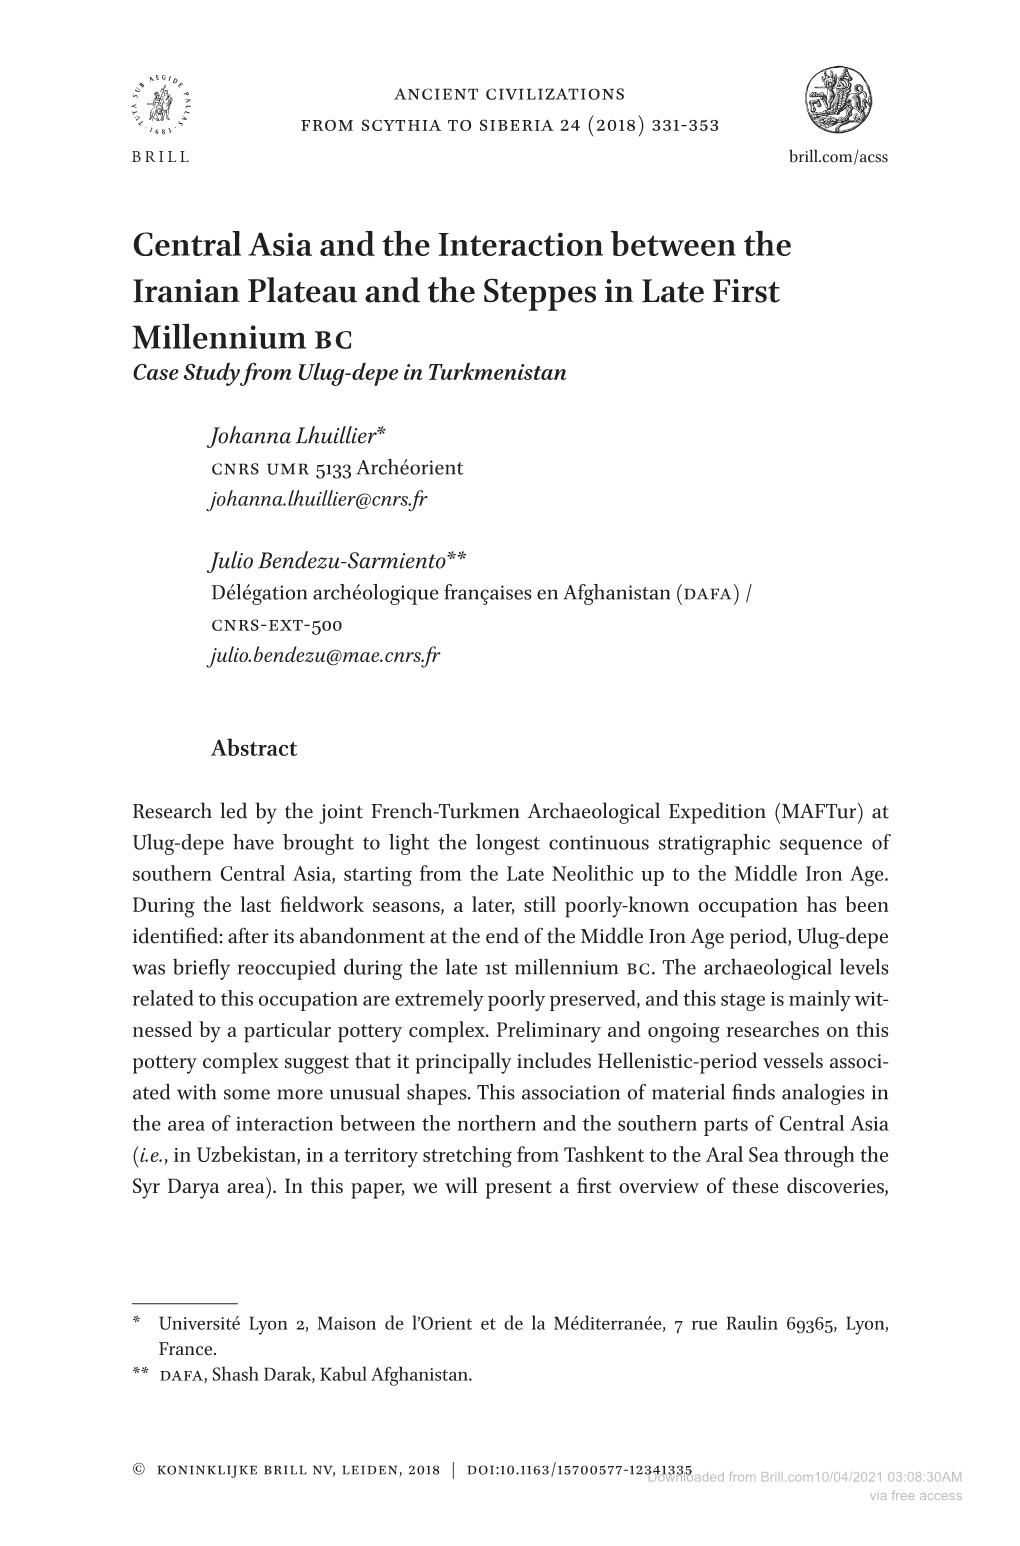 Central Asia and the Interaction Between the Iranian Plateau and the Steppes in Late First Millennium BC Case Study from Ulug-Depe in Turkmenistan